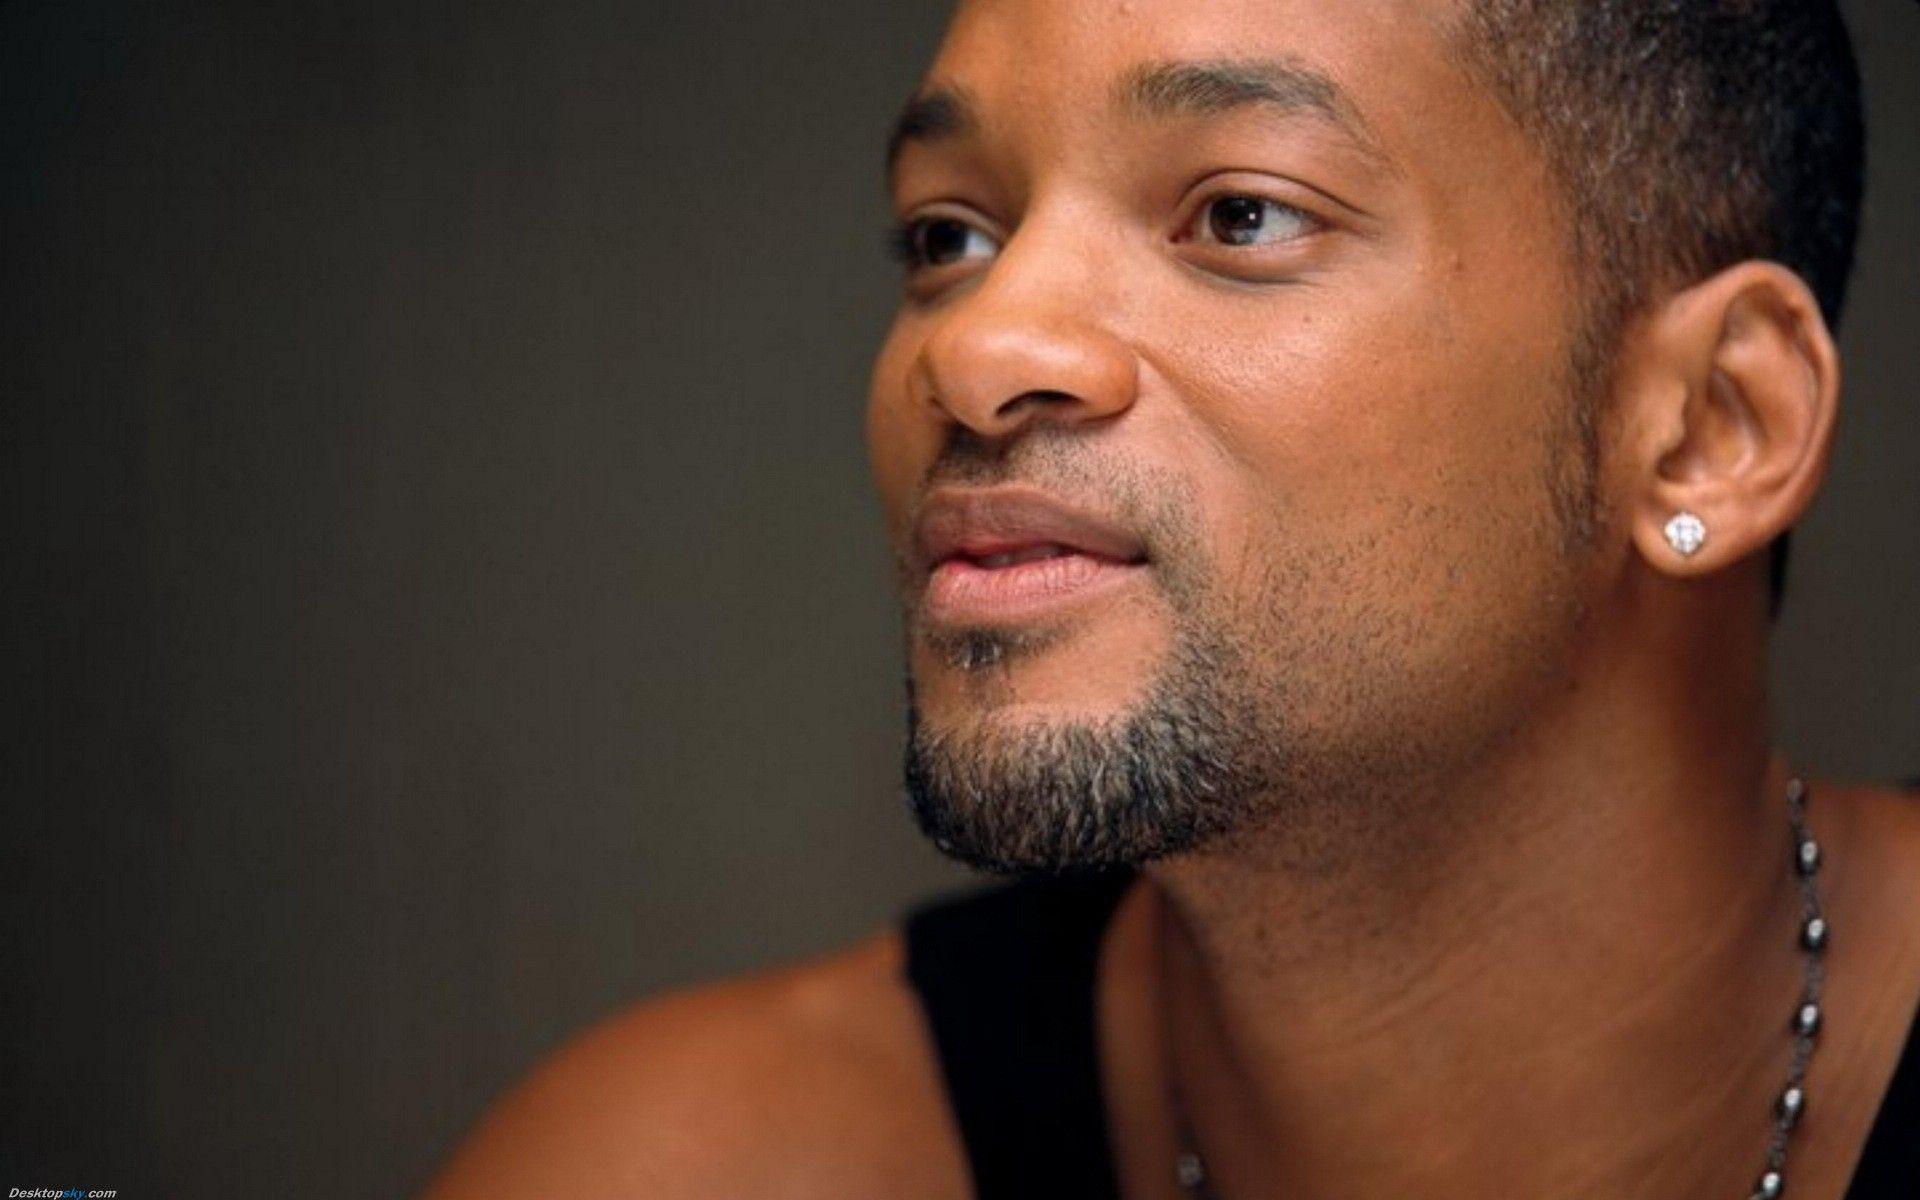 Will Smith Wallpaper. Free Download HD English Celebrities Image